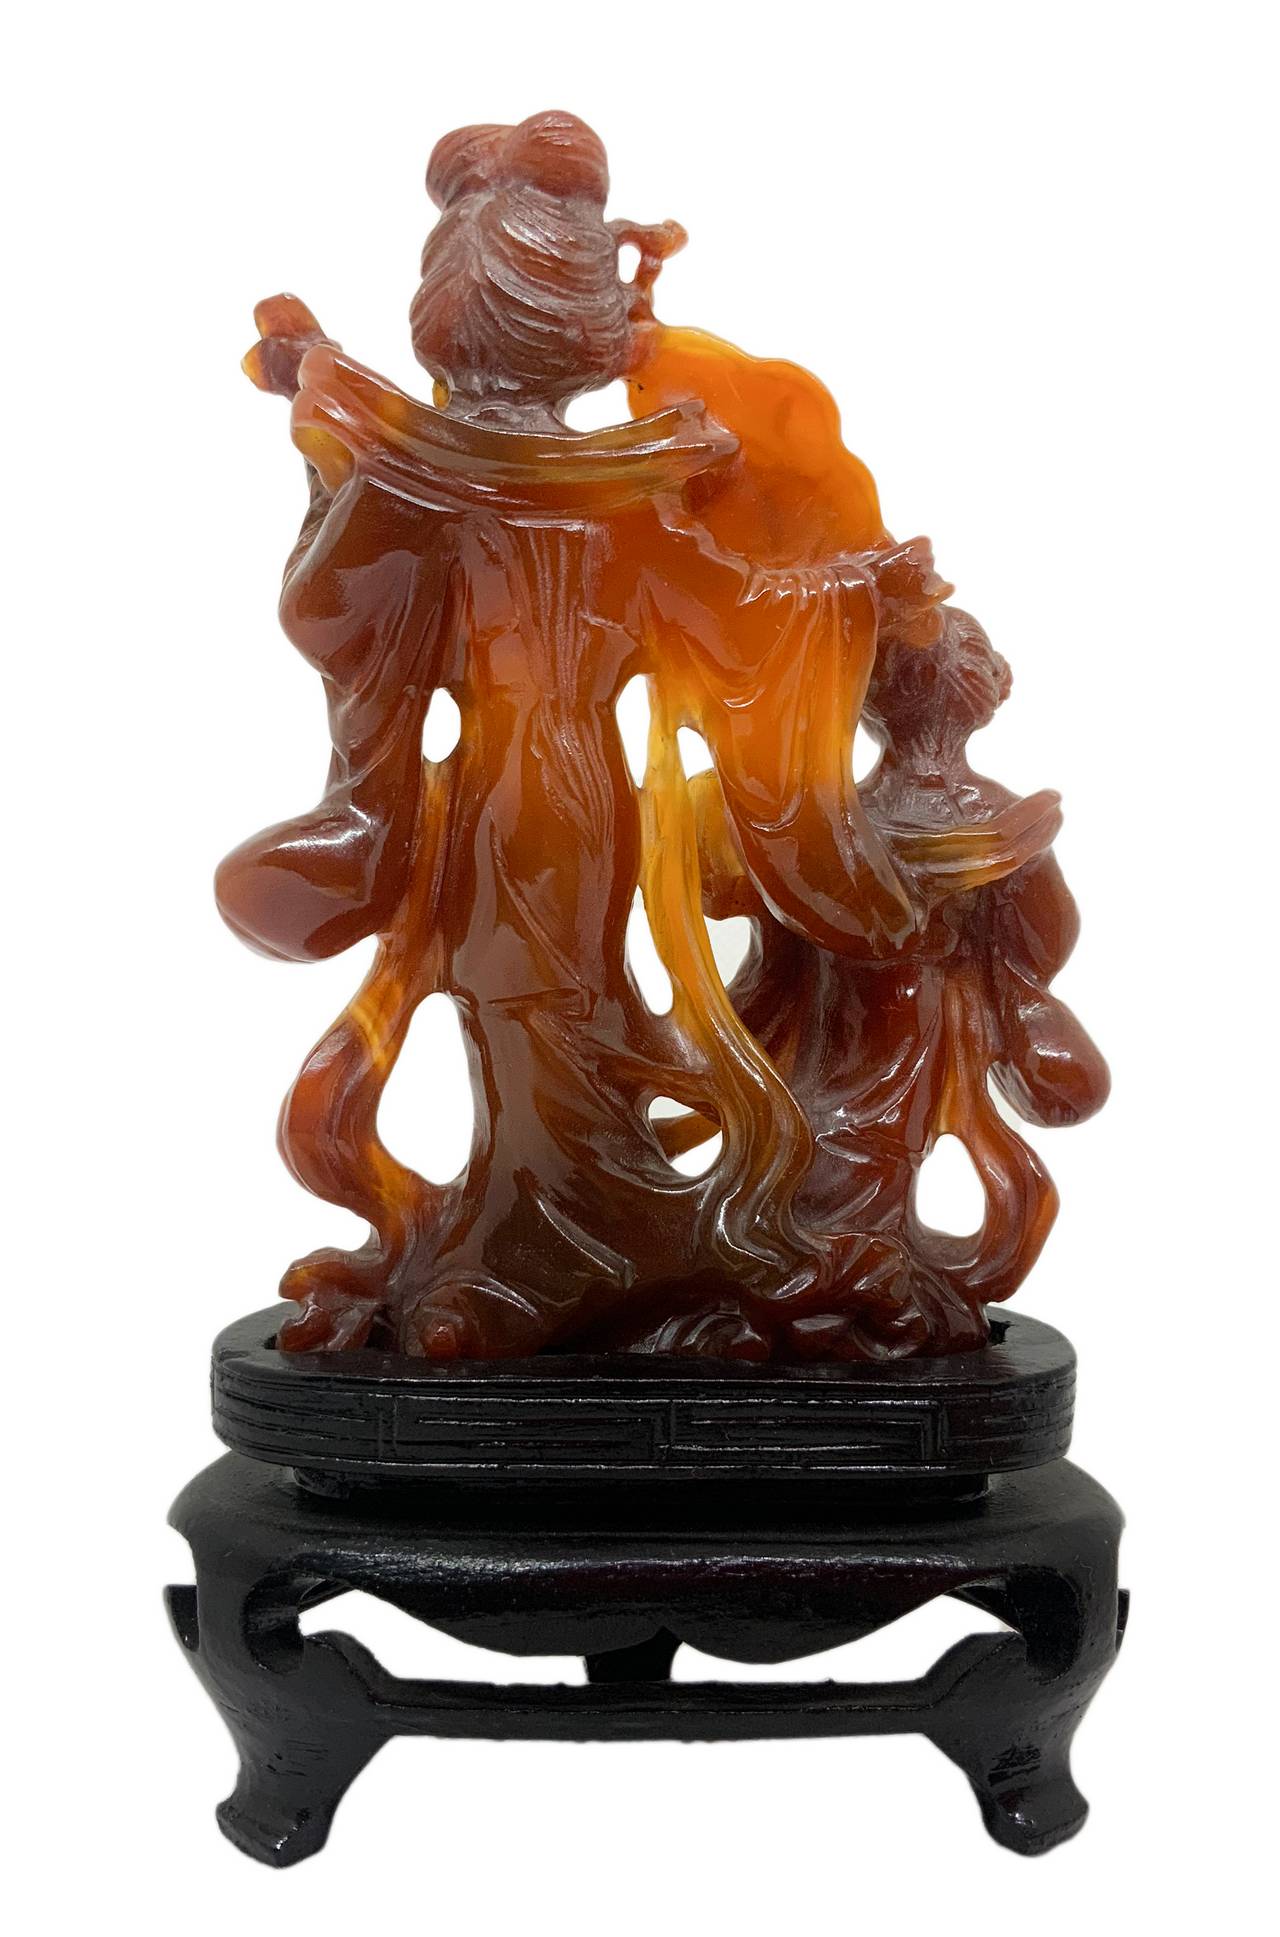 Statuette of brown carnelian depicting "Motherhood" (Guanine with daughter). H cm 11, H cm with base - Image 2 of 3